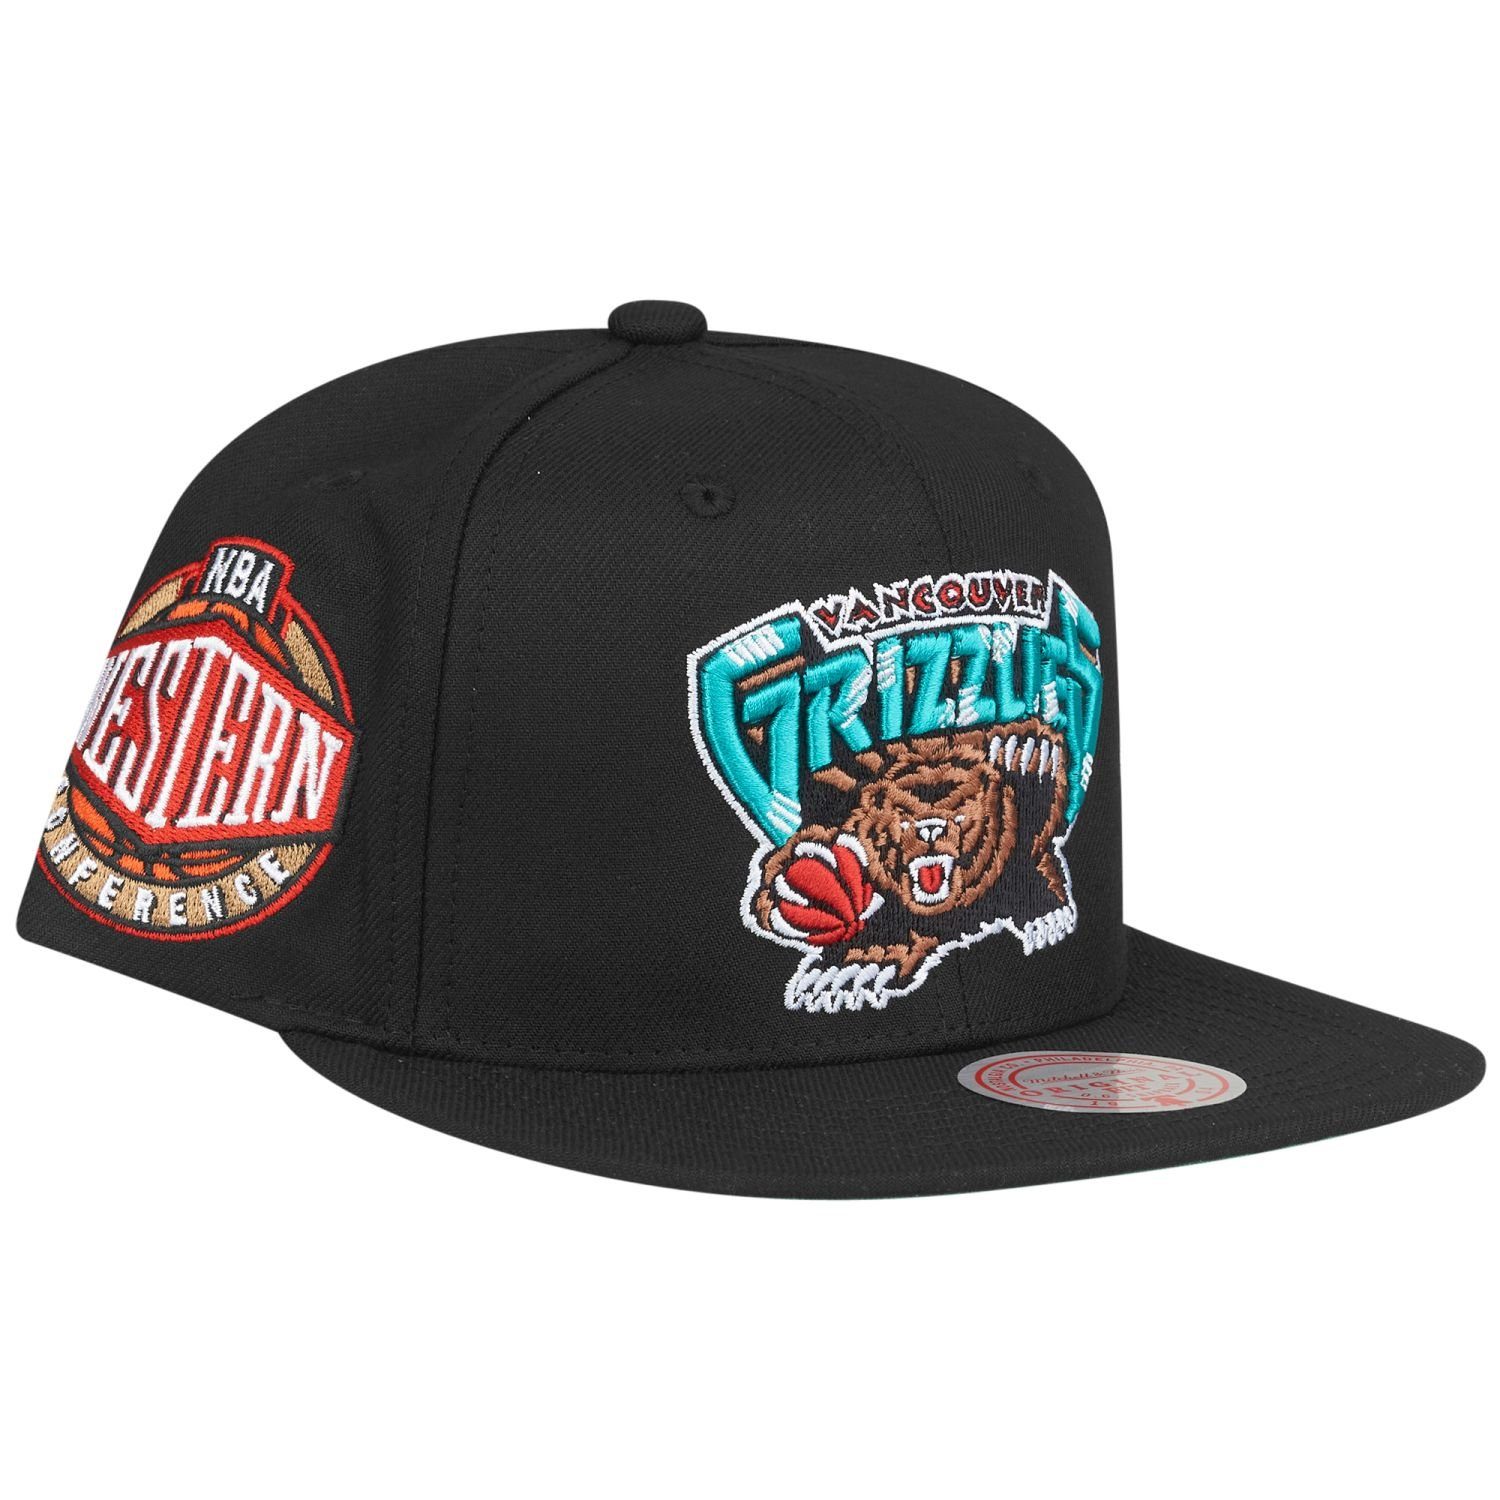 Mitchell & Ness Snapback Cap SIDEPATCH Vancouver Grizzlies